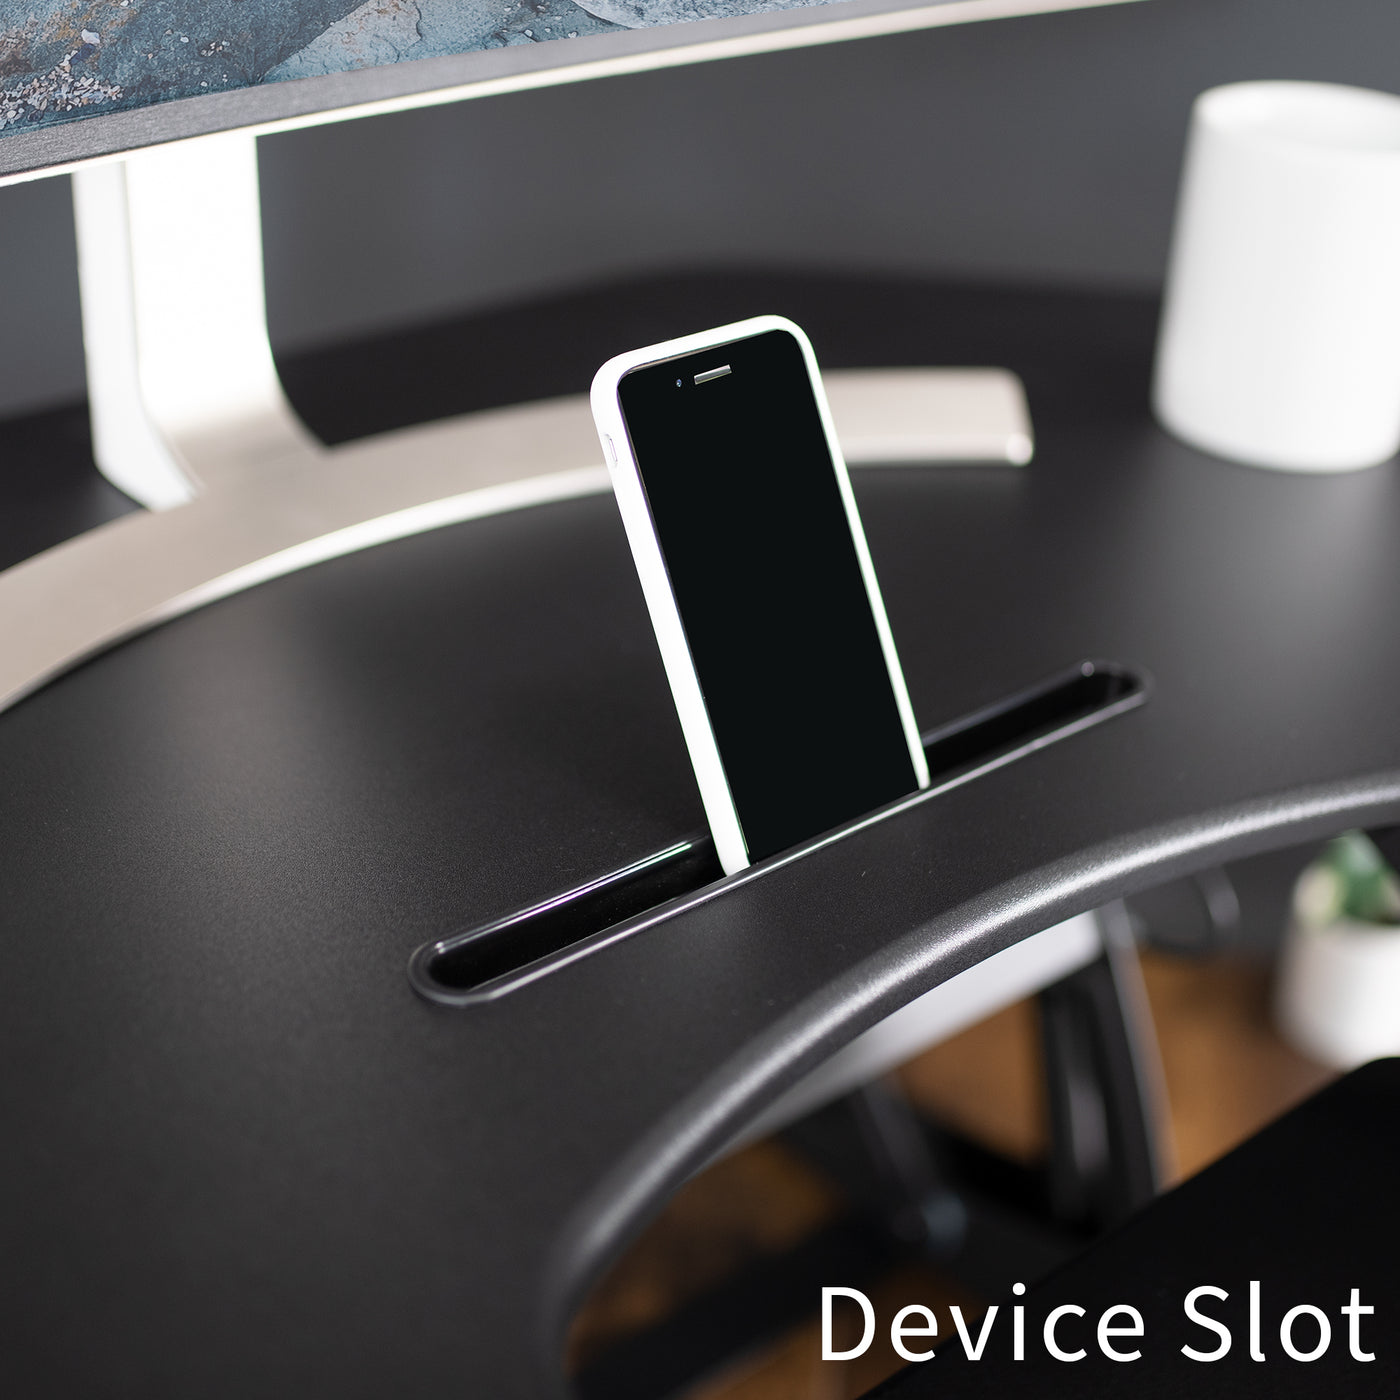 Designated device slot to keep your phone or tablet in a convenient place.